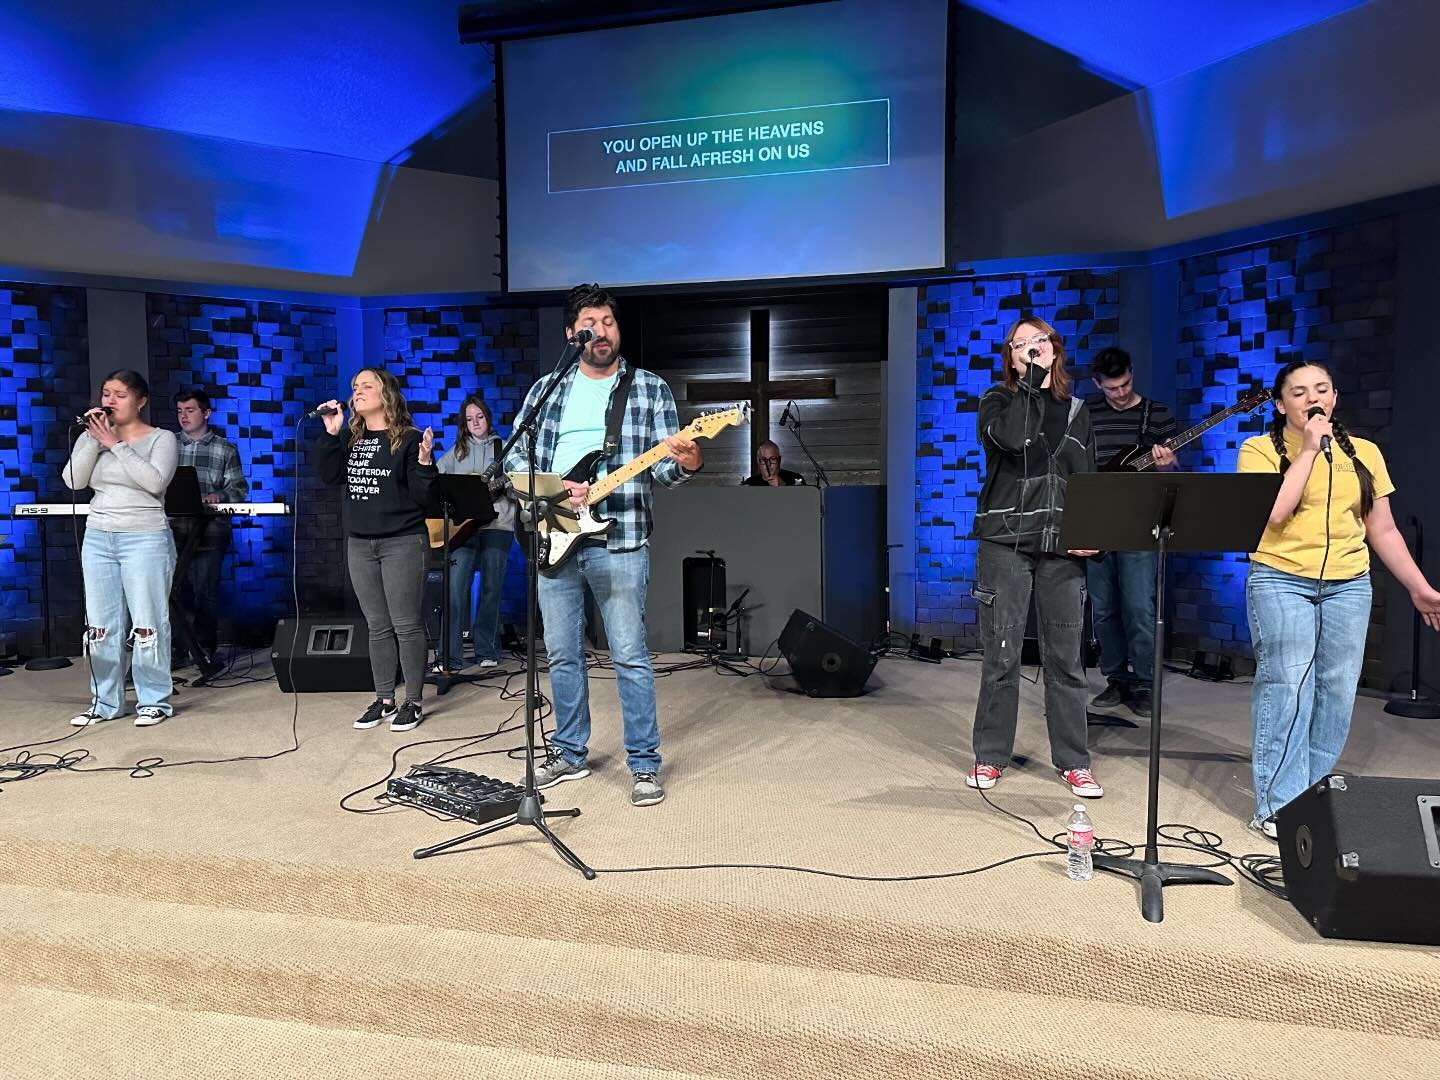 Rest well Life Church! In 12 hours we get to be together to worship the Lord! See you Sunday at 10am! Bring a friend because LIFE is better together!